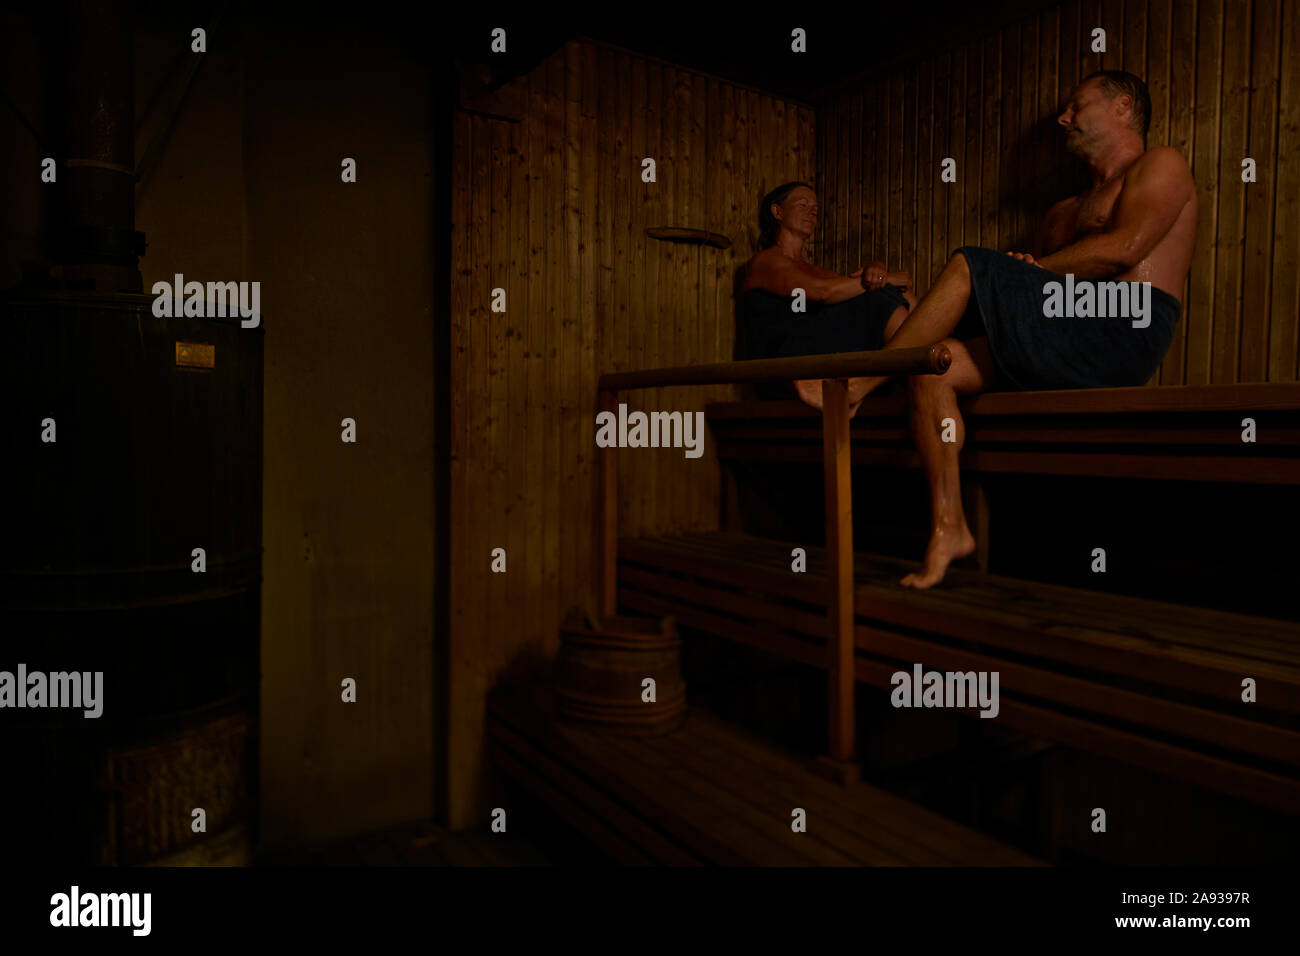 Couple relaxing in sauna Banque D'Images